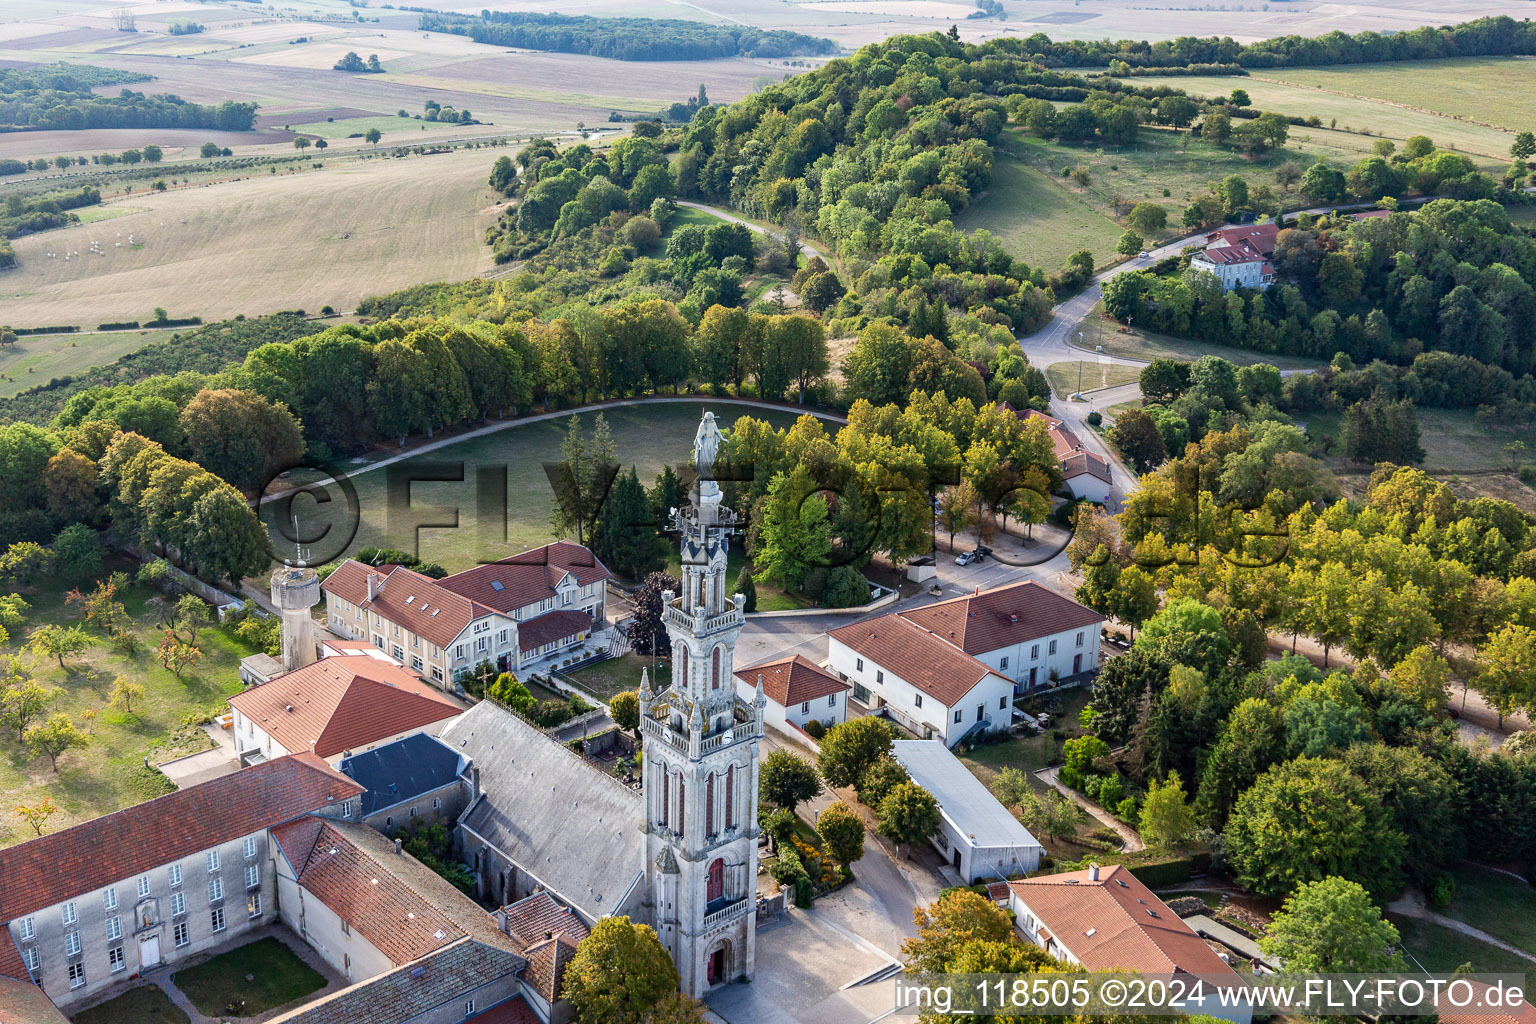 Aerial view of Church tower and tower roof at the church building of Basilique Notre-Dame de Sion in Saxon-Sion in Grand Est, France